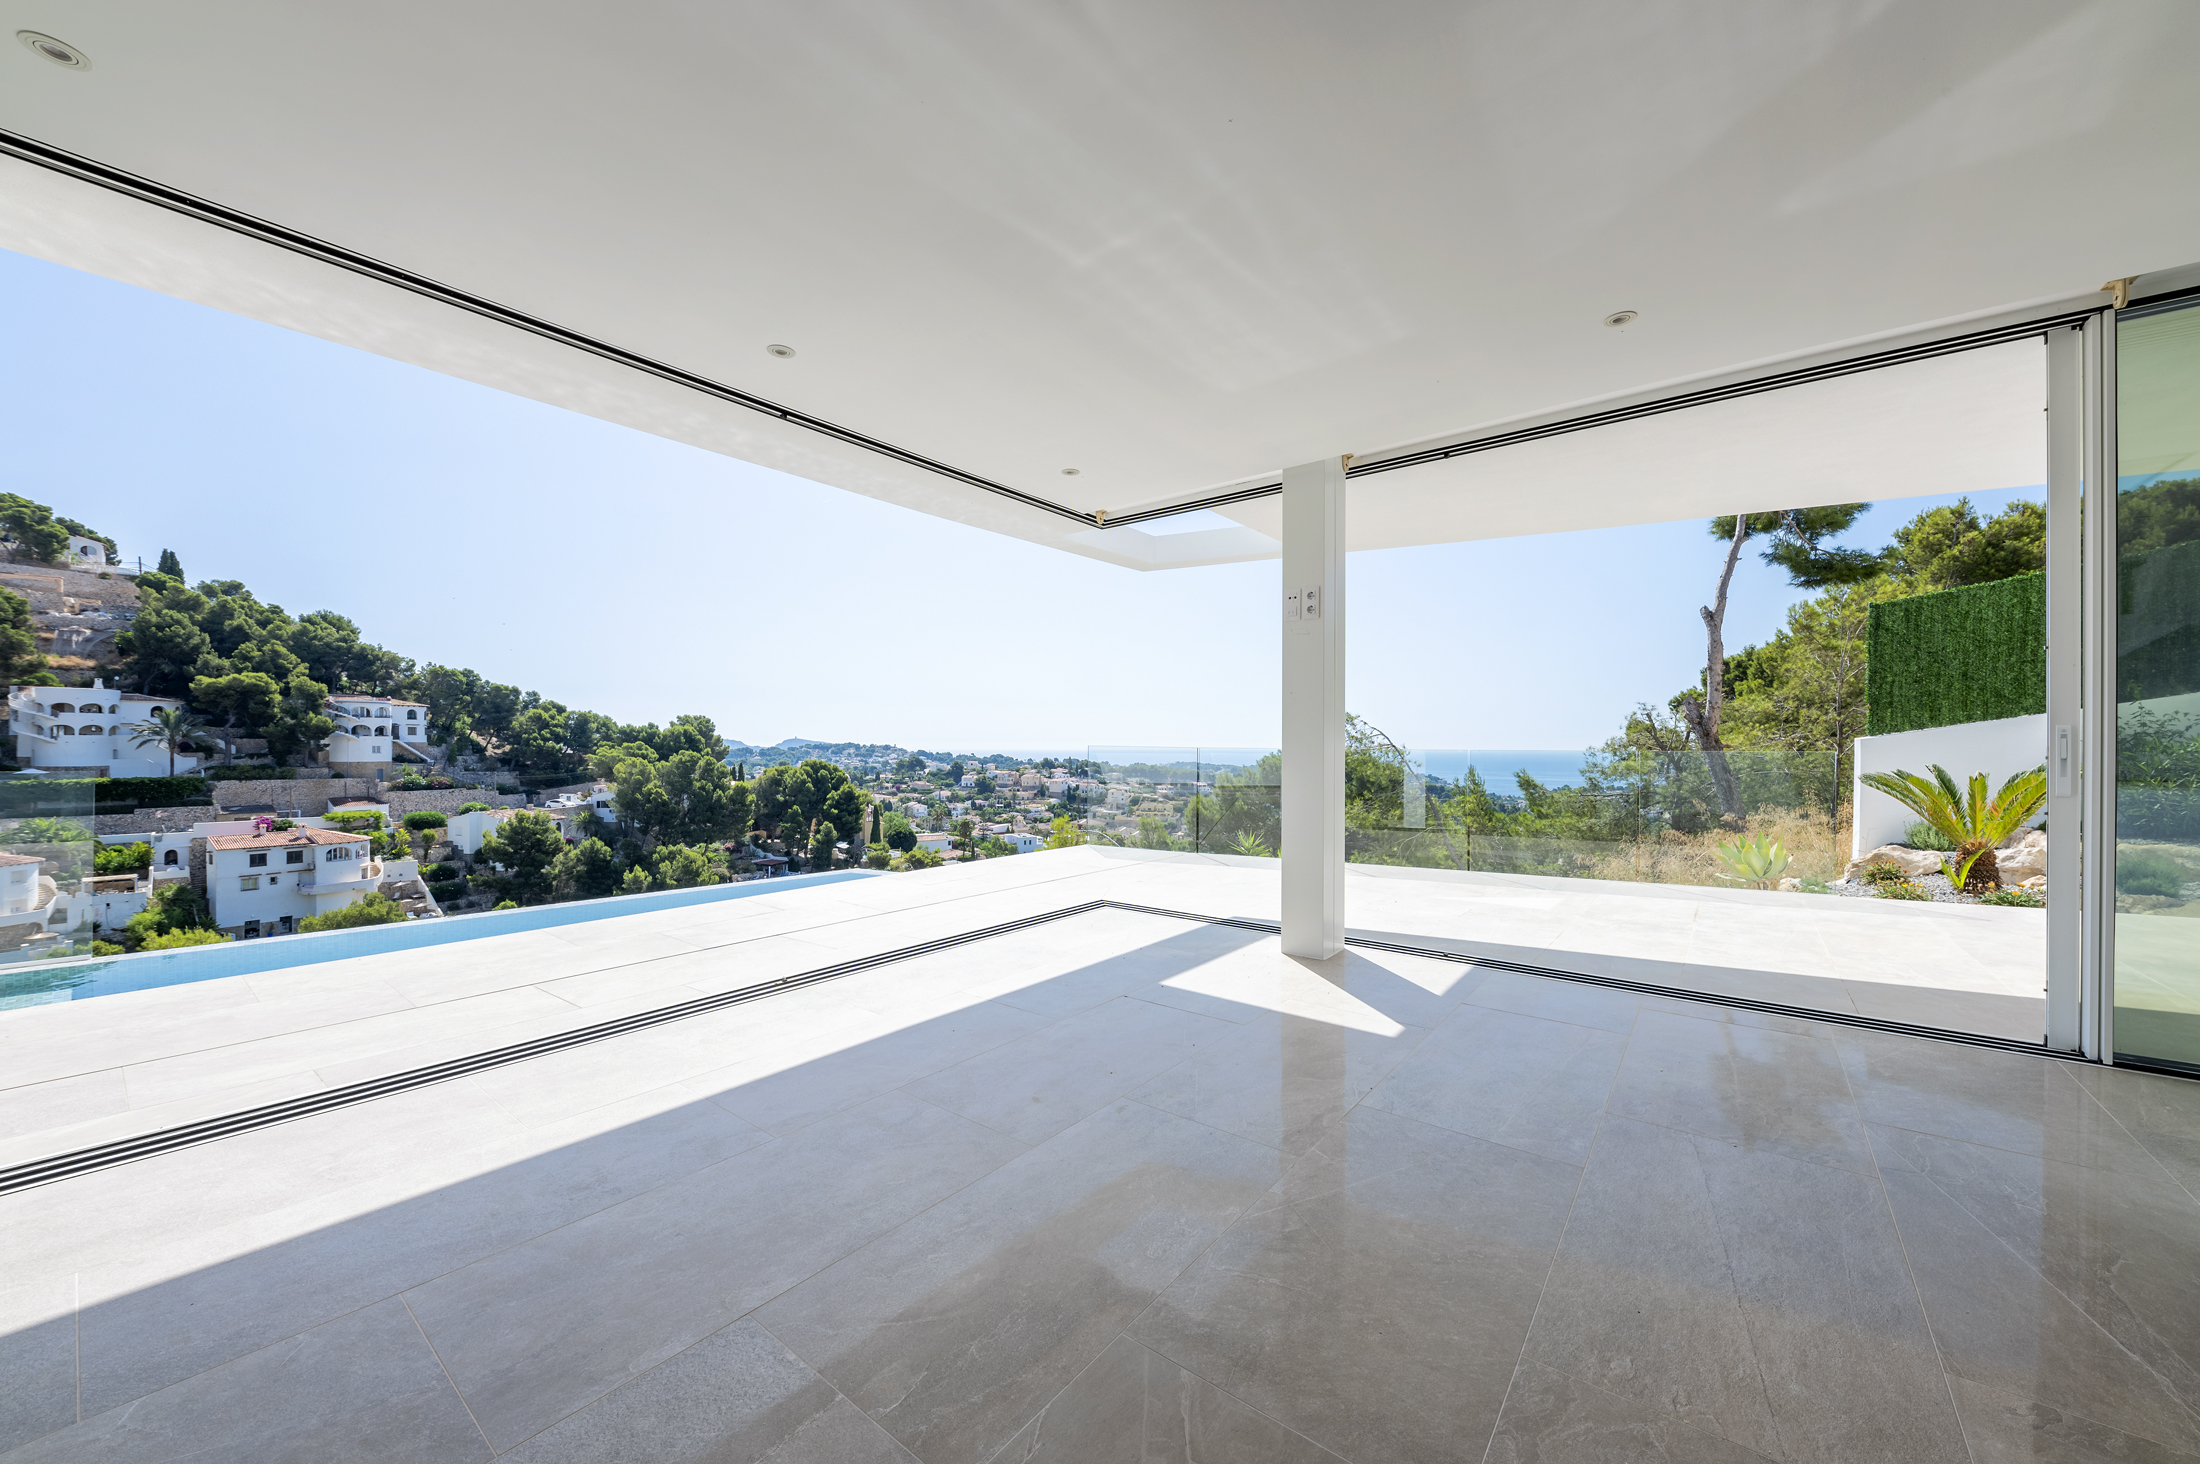 BRAND NEW VILLA WITH PANORAMIC VIEWS OF THE SEA AND PEÑON DE IFACH IN BENISSA